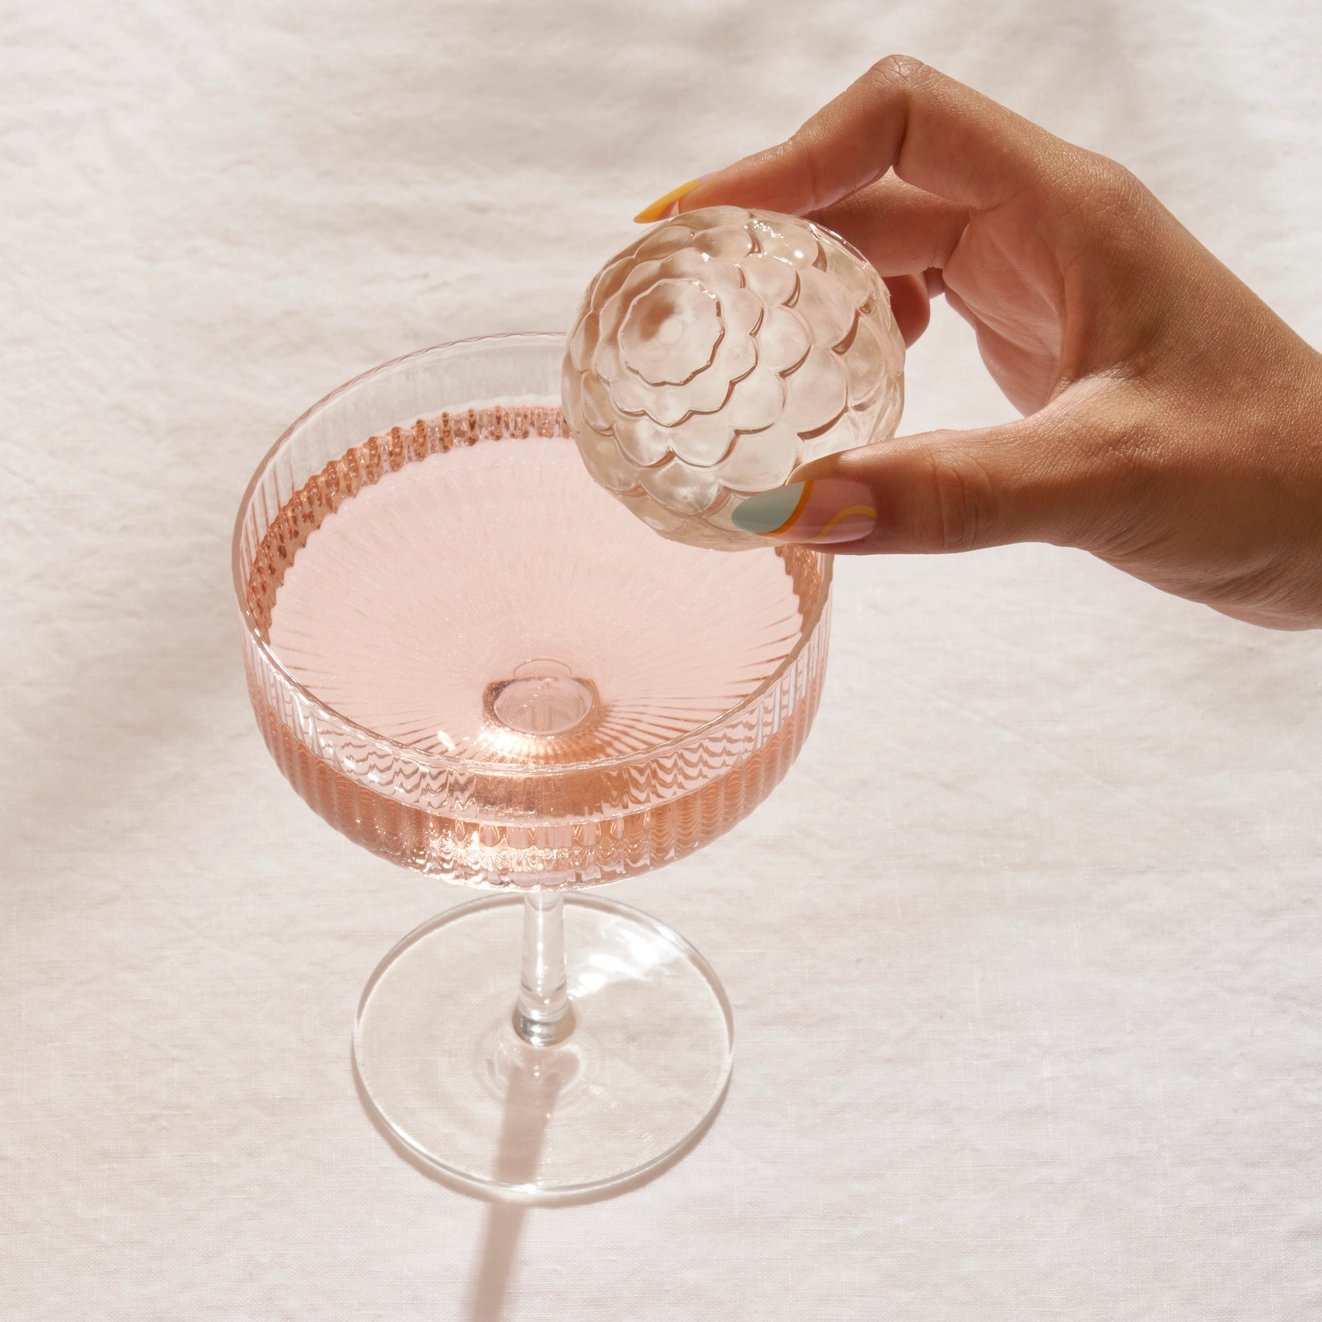 A person's hand gently placing an intricate ice cube into an elegant coupe glass filled with a pink beverage, set against a neutral textured backdrop.